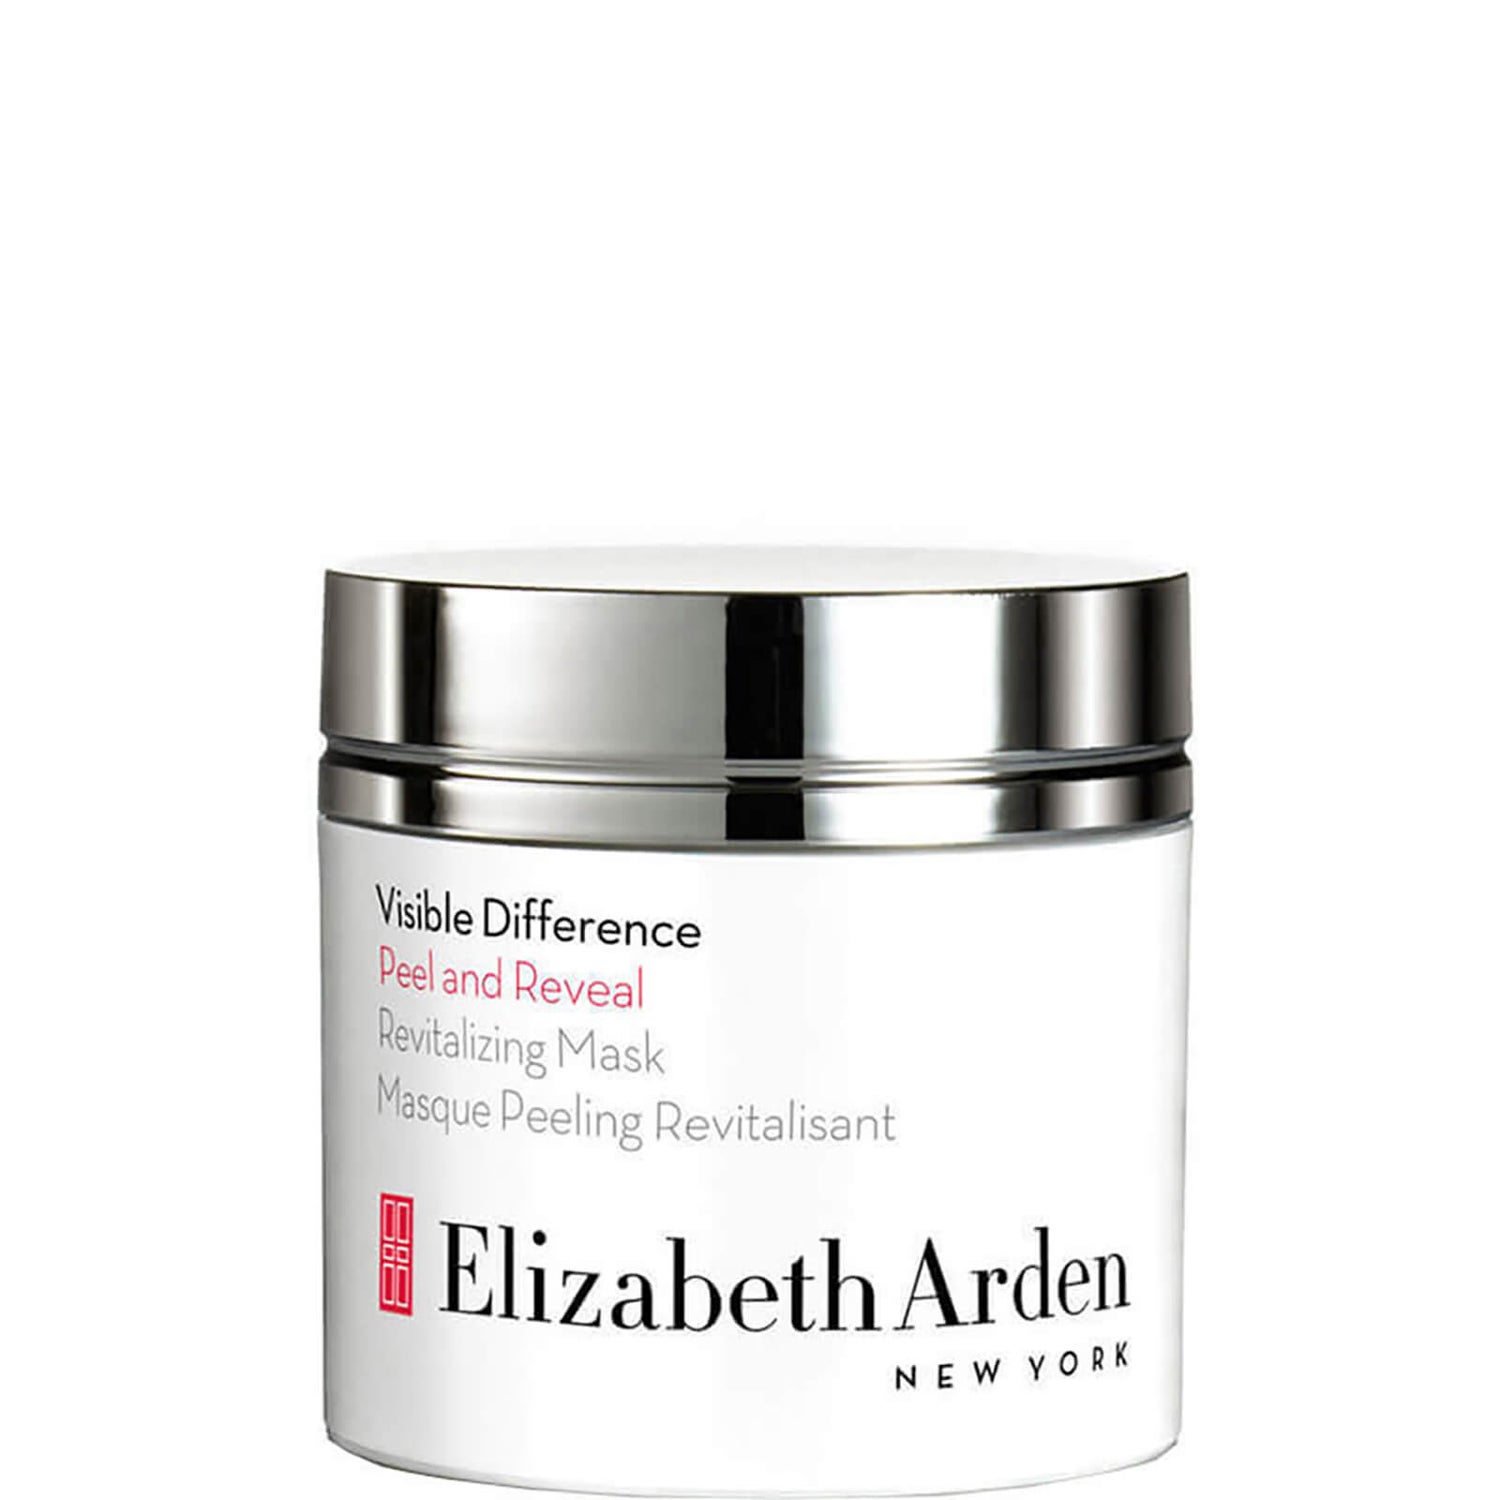 Elizabeth Arden Visible Difference Peel & Reveal Revitalizing Mask -naamio (50ml)